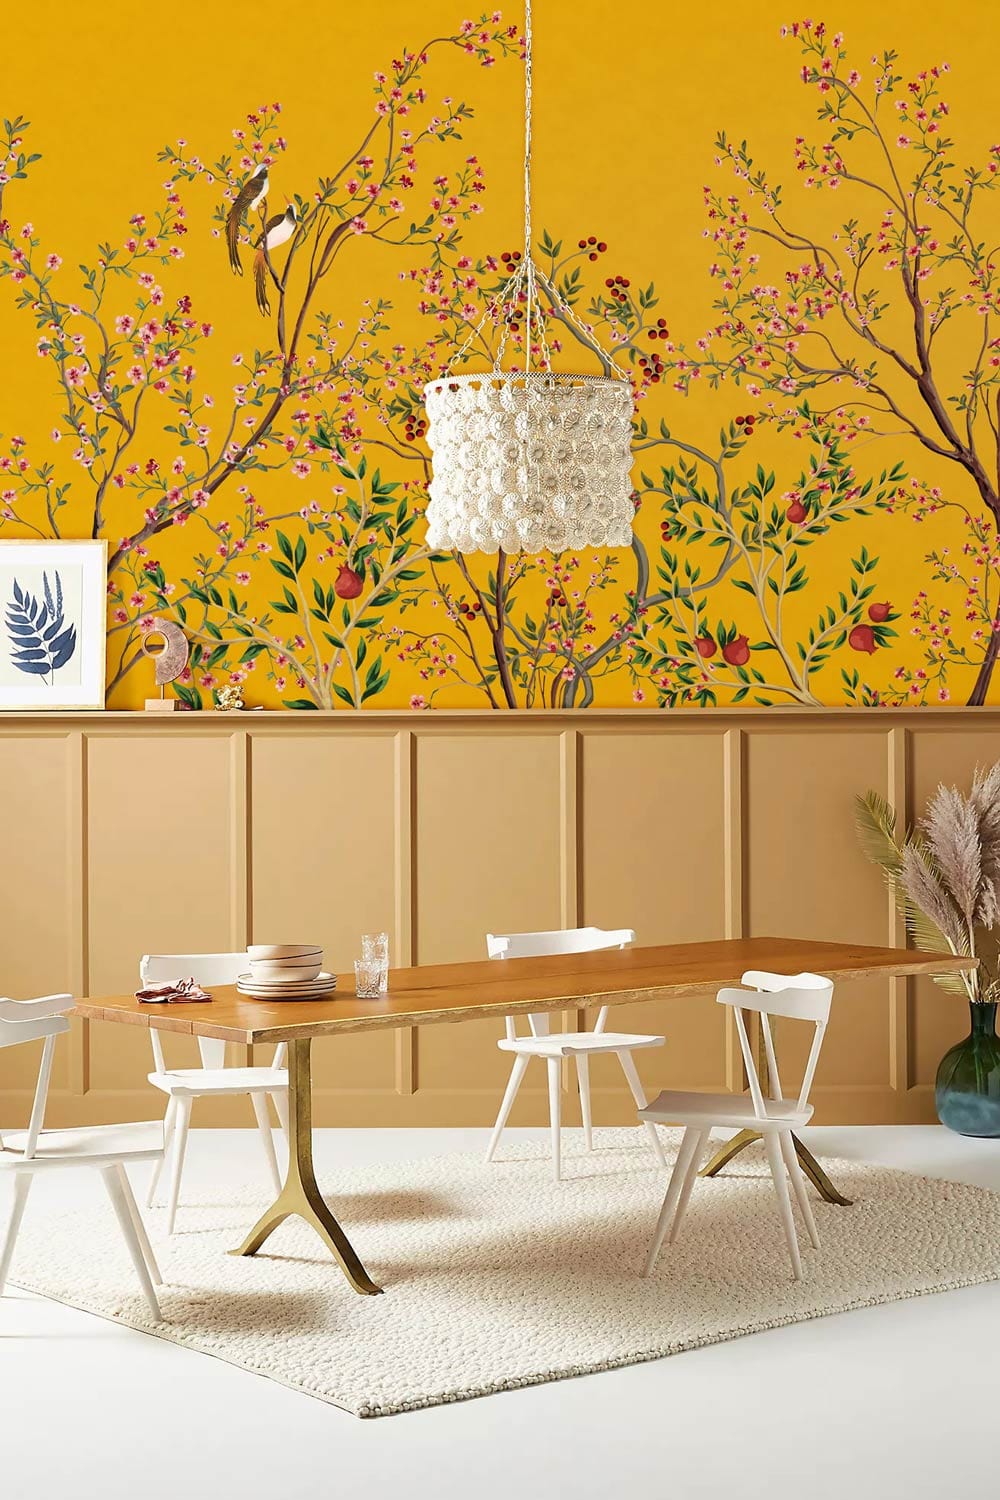 Dining room wall paintings with a pomegranate tree with fruit in blossom and birds perched on them